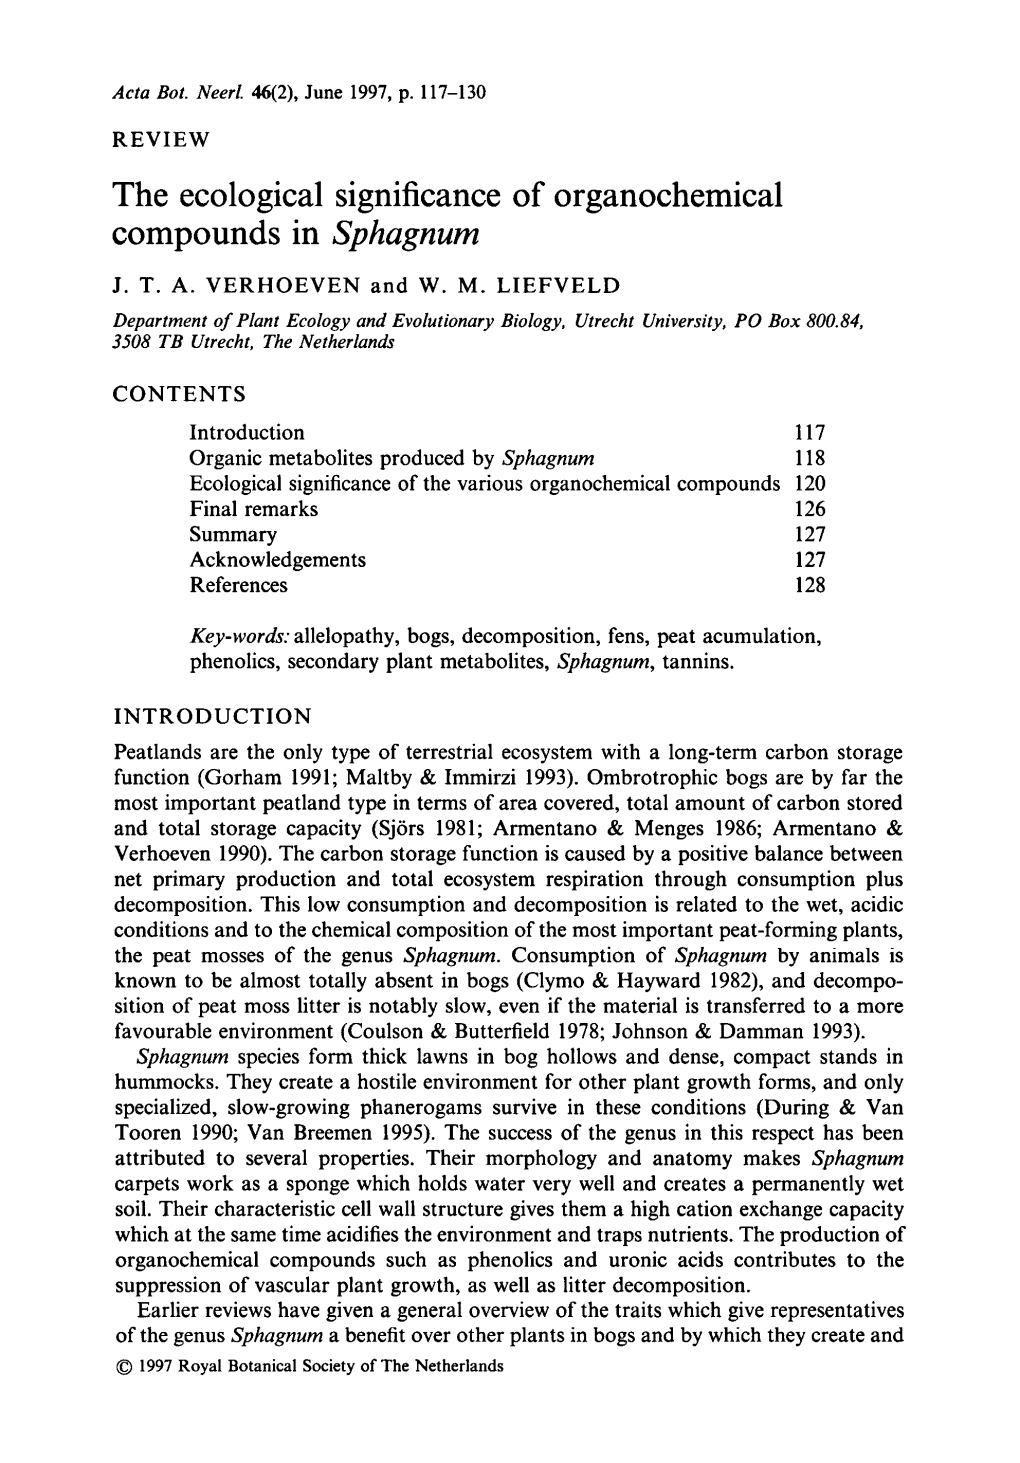 The Ecological Significance of Organochemical Sphagnum